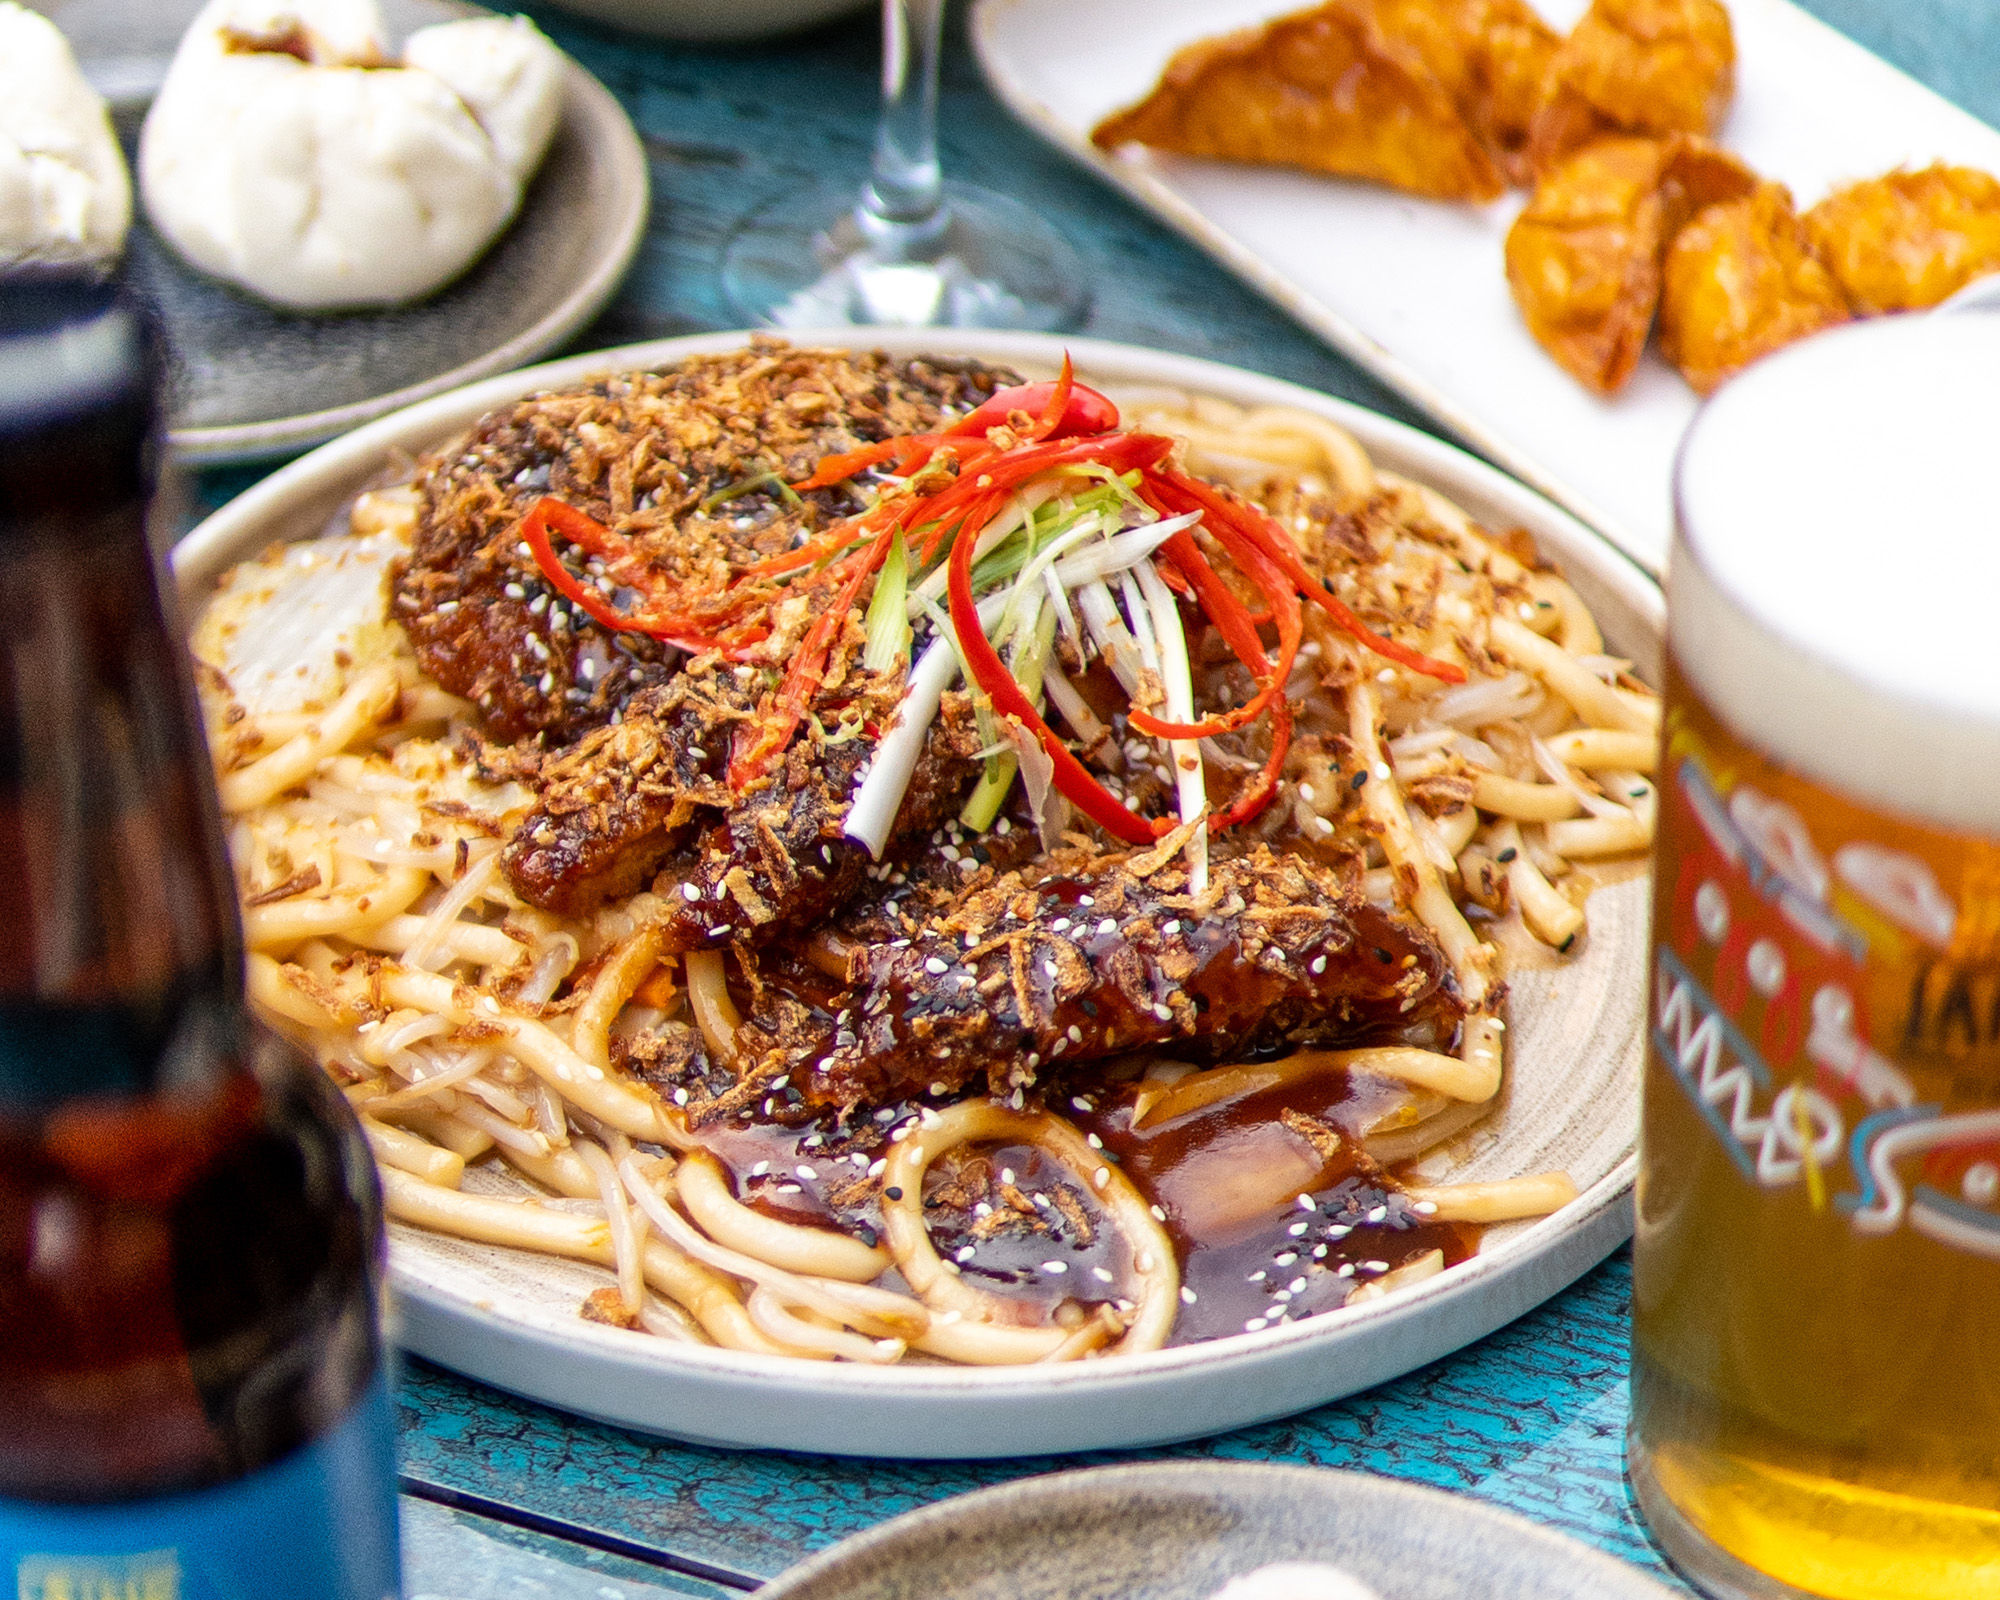 A close up shot of plate of udon noodles with a bottle and glass of beer at Oculist Brighton. The noodles have a dark sauce and are garnished with sliced red chilli and spring onions.